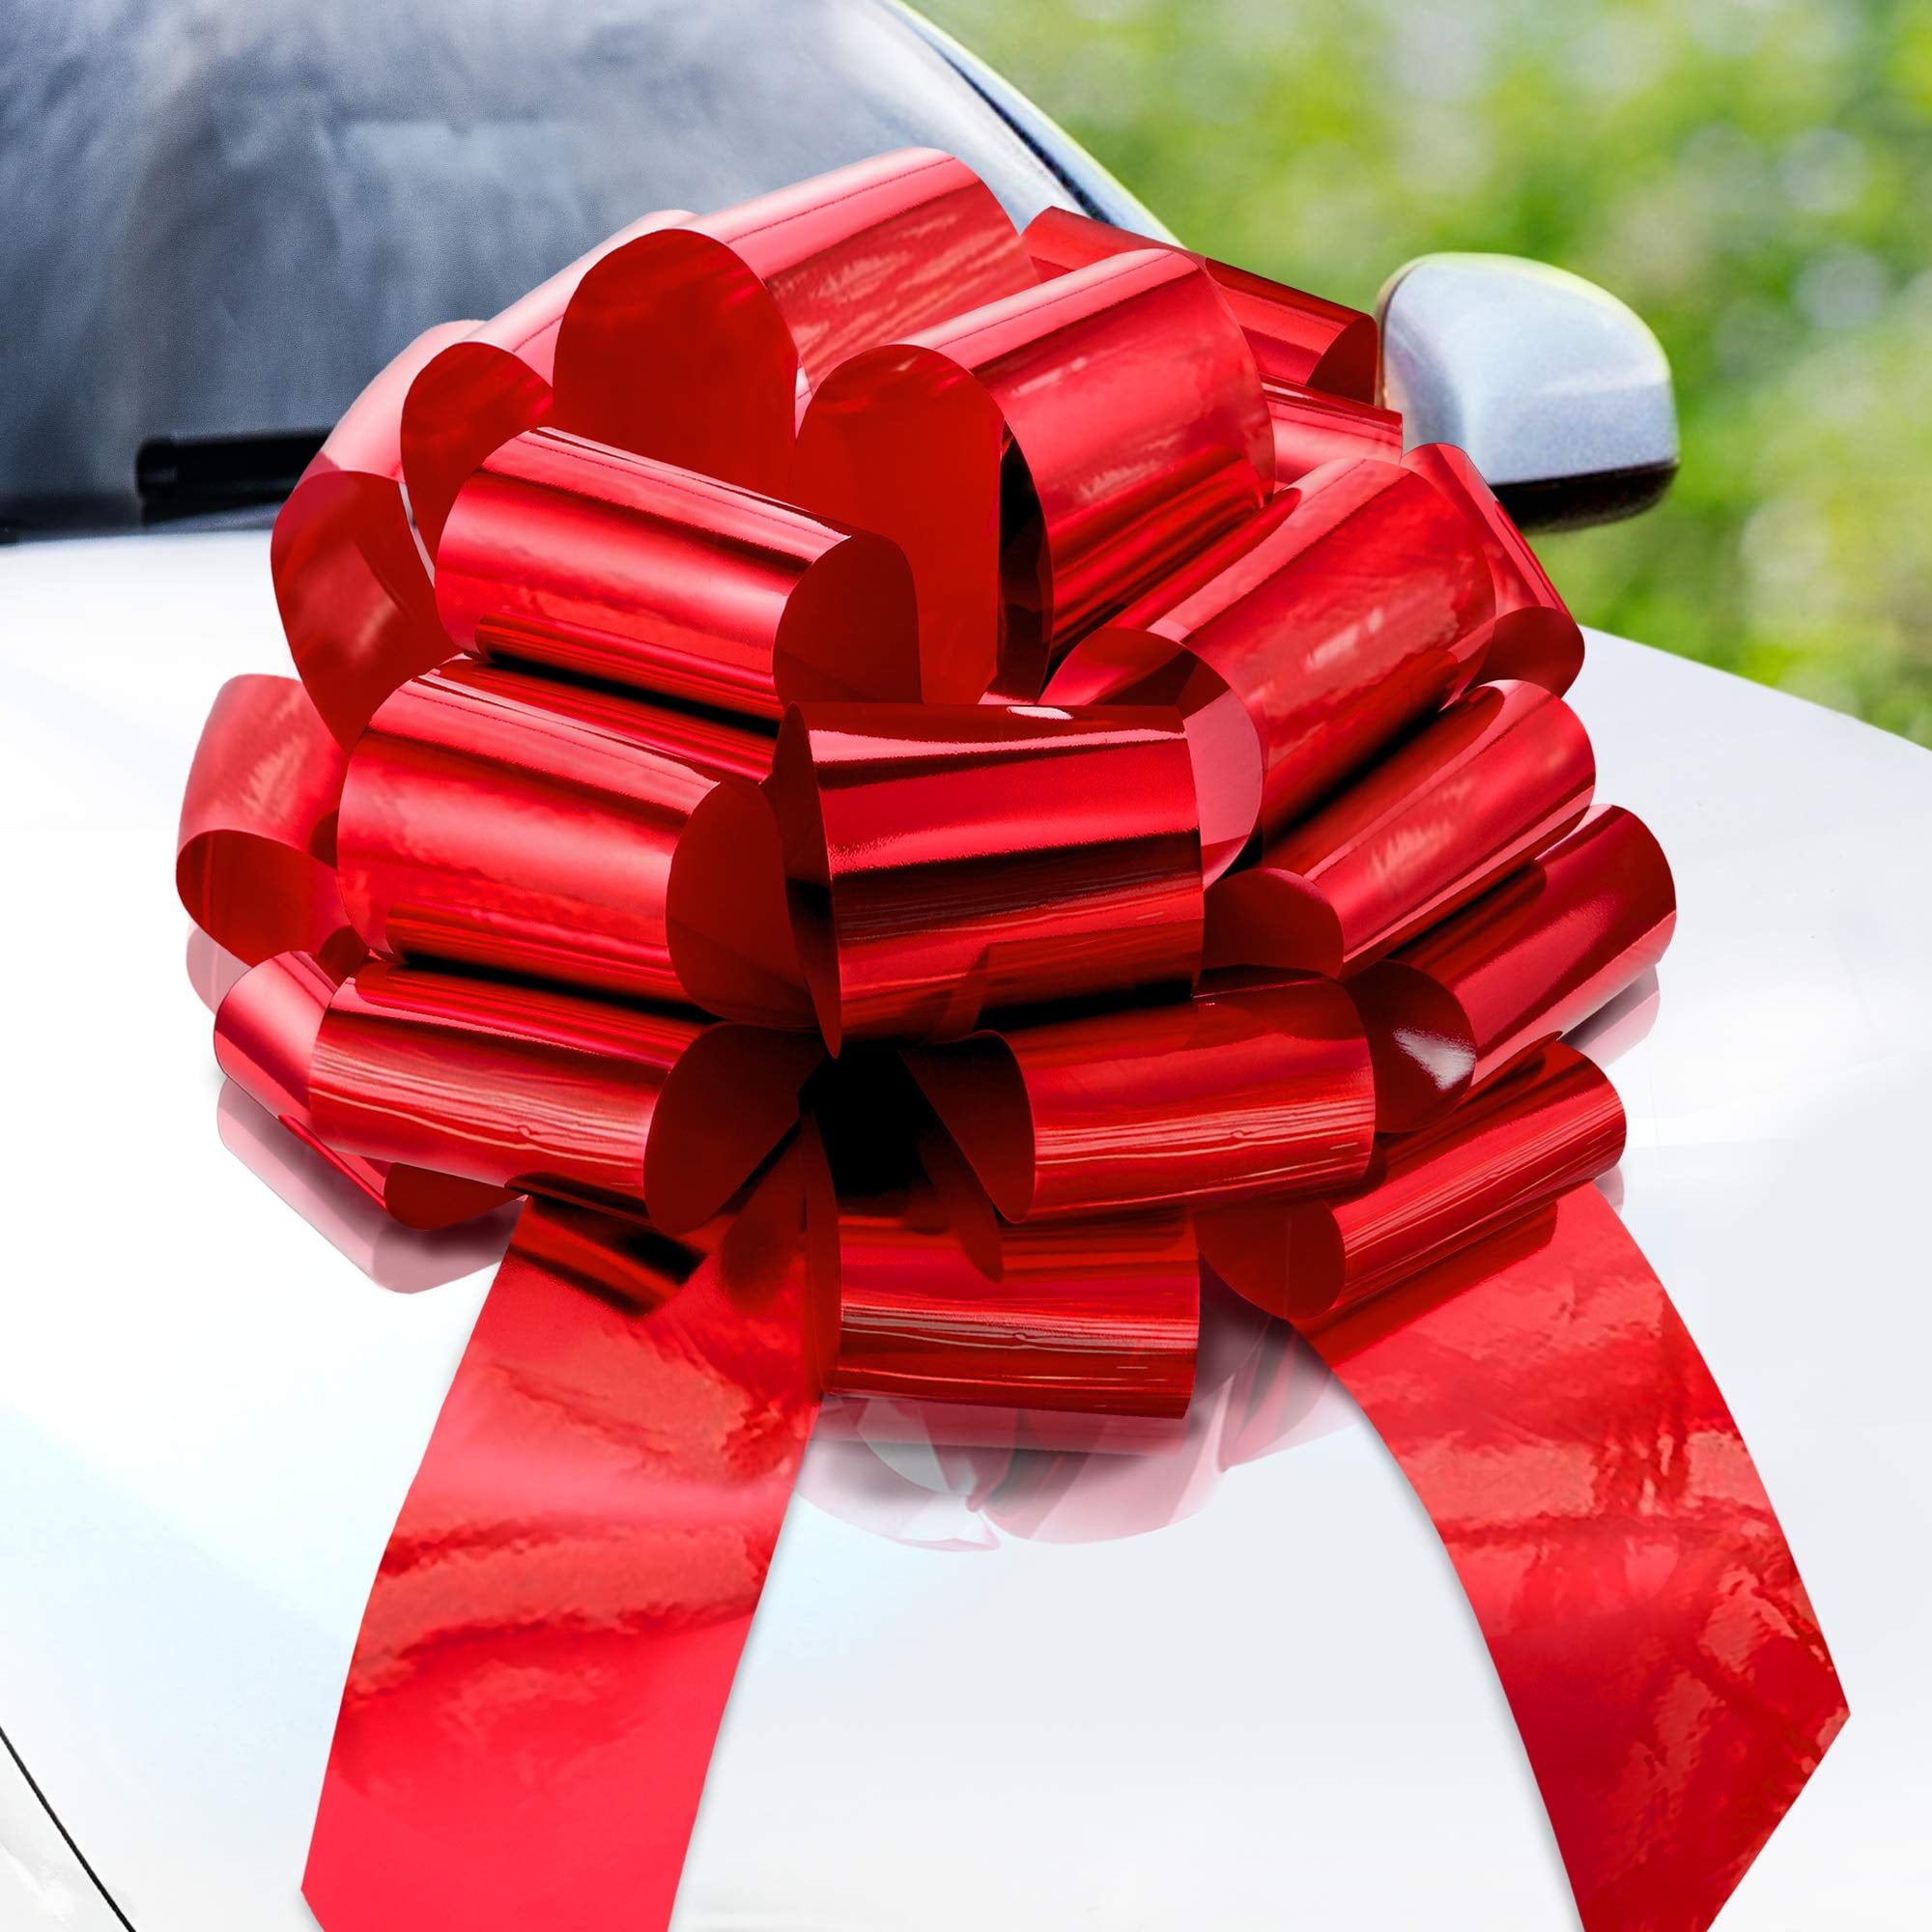 Pull Bows Florist Gift Car Ribbon XXXL GIANT Pullbows Set of 6 